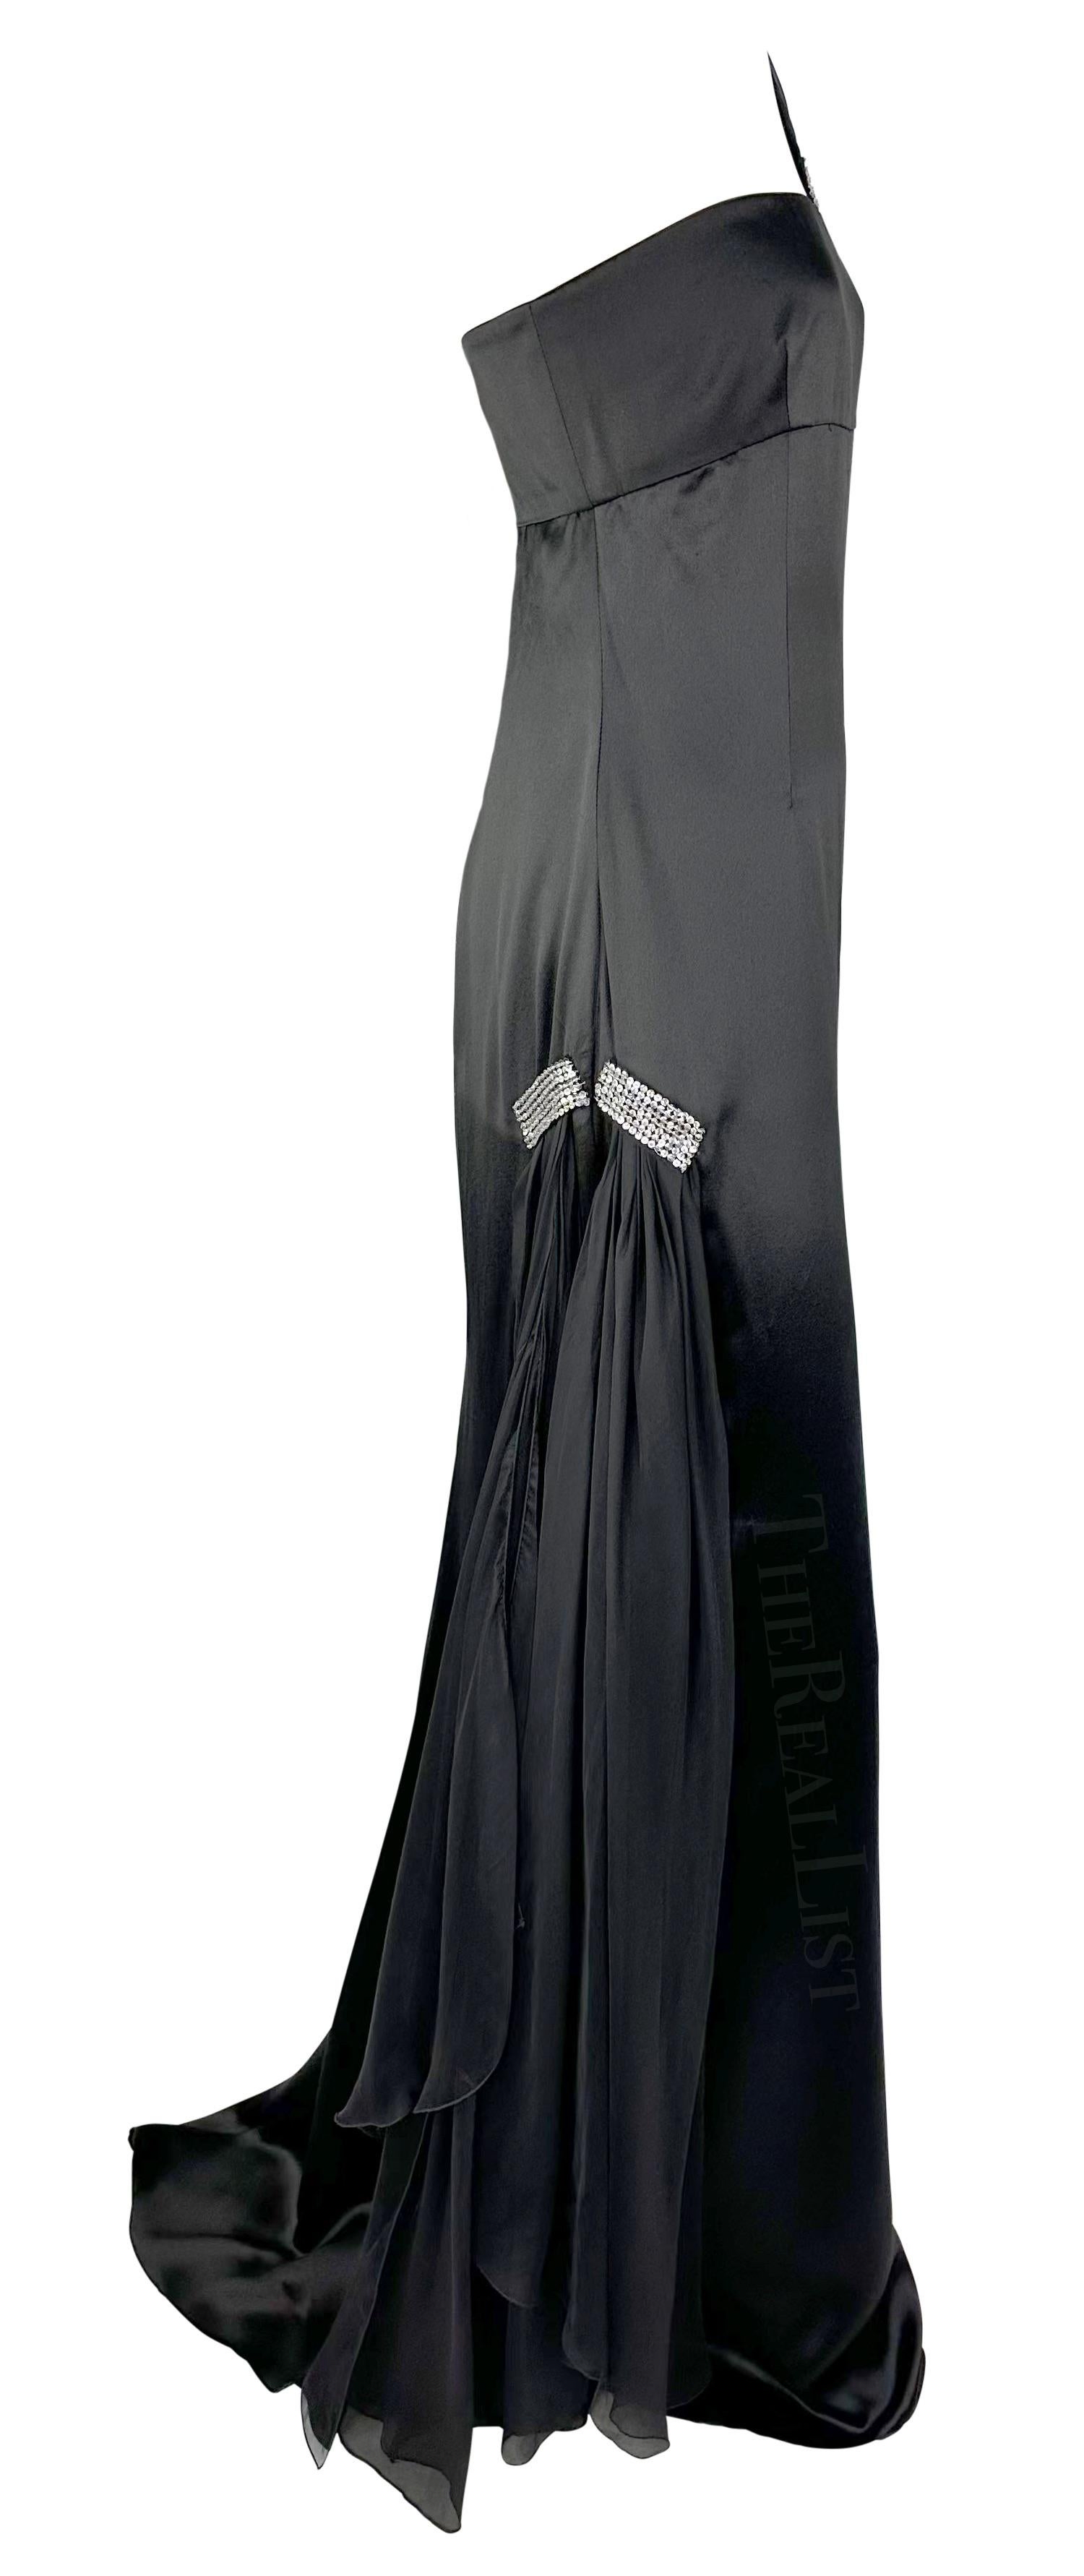 Presenting a glamorous black silk satin asymmetric gown. Designed by Valentino Garavani in the early 2000s, this floor-length dress is constructed entirely of silk satin and features a single shoulder strap, small train, and silver-tone sequins